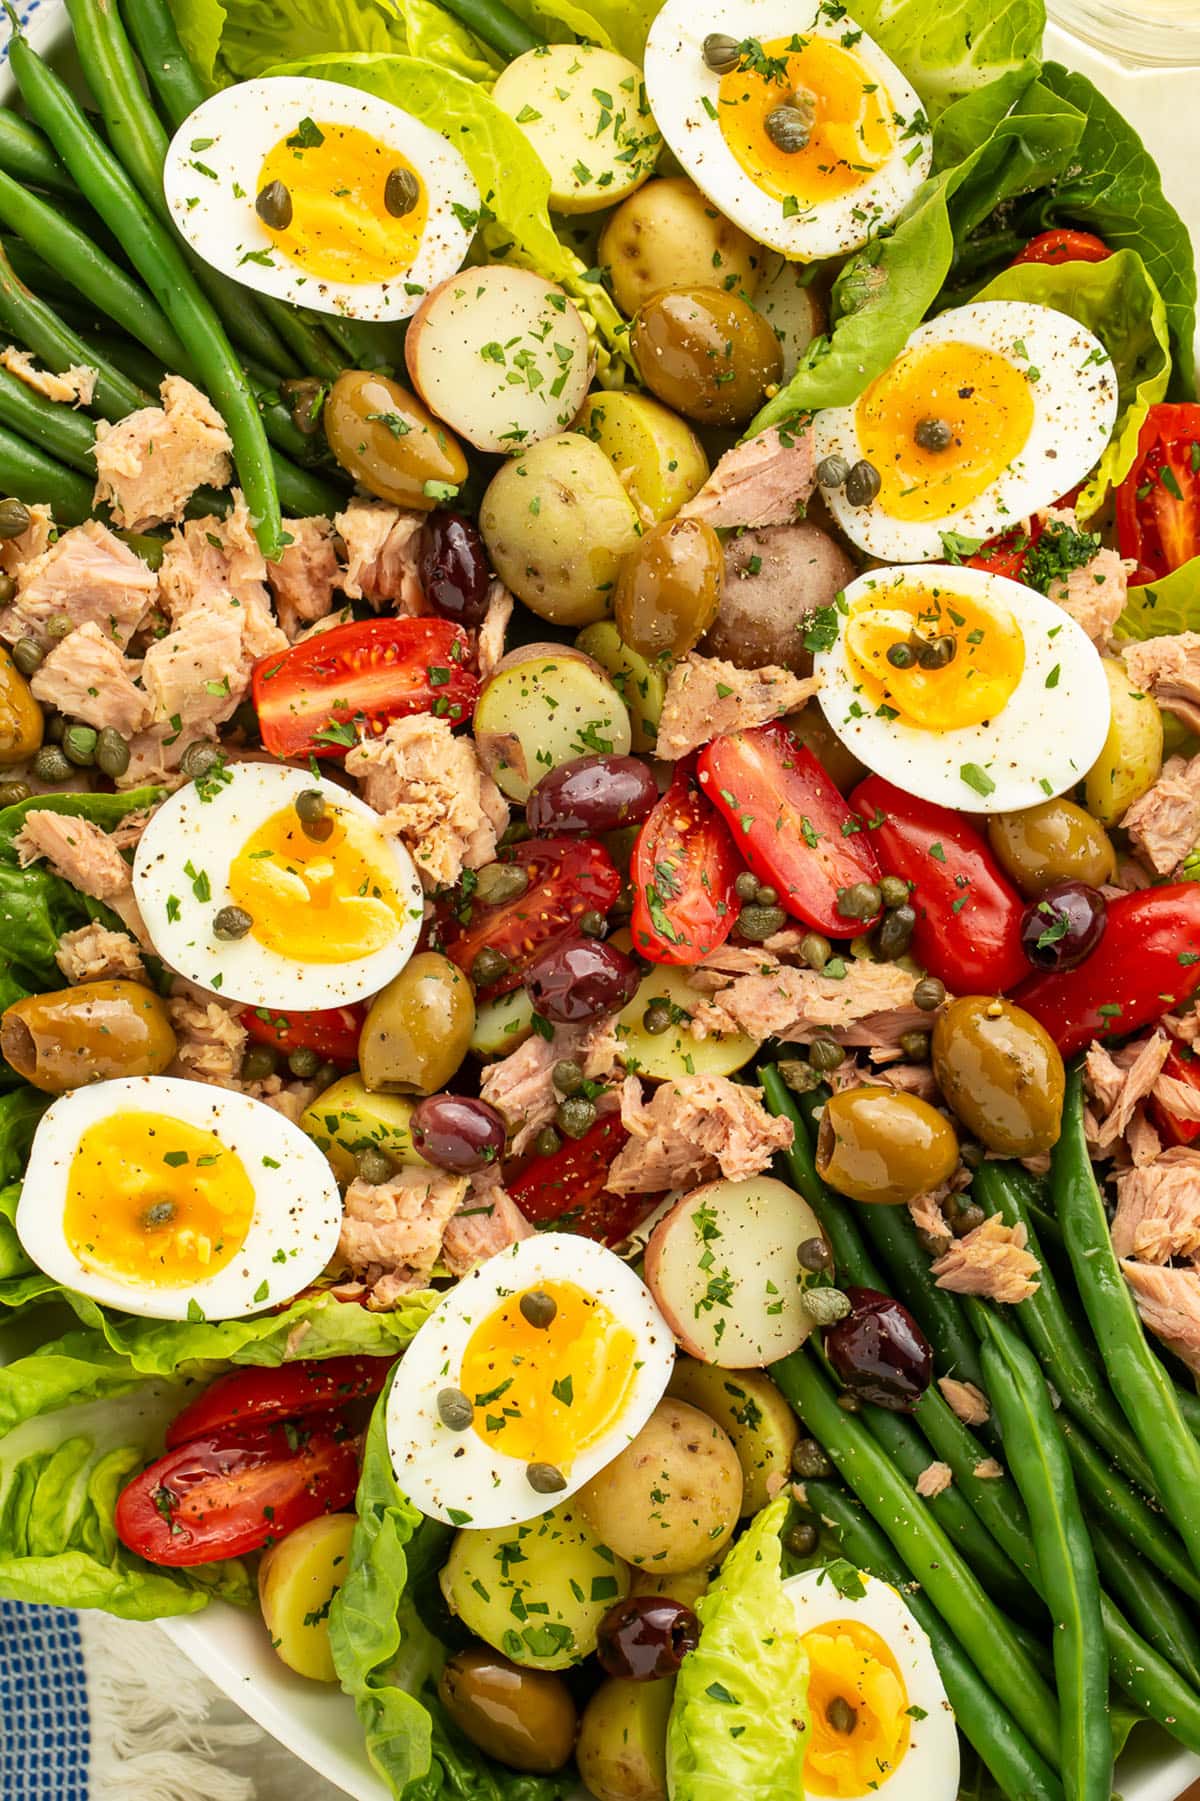 A close-up of Nicoise salad with potatoes, green beans, eggs, lettuce, olives, capers, tomatoes, and tuna.